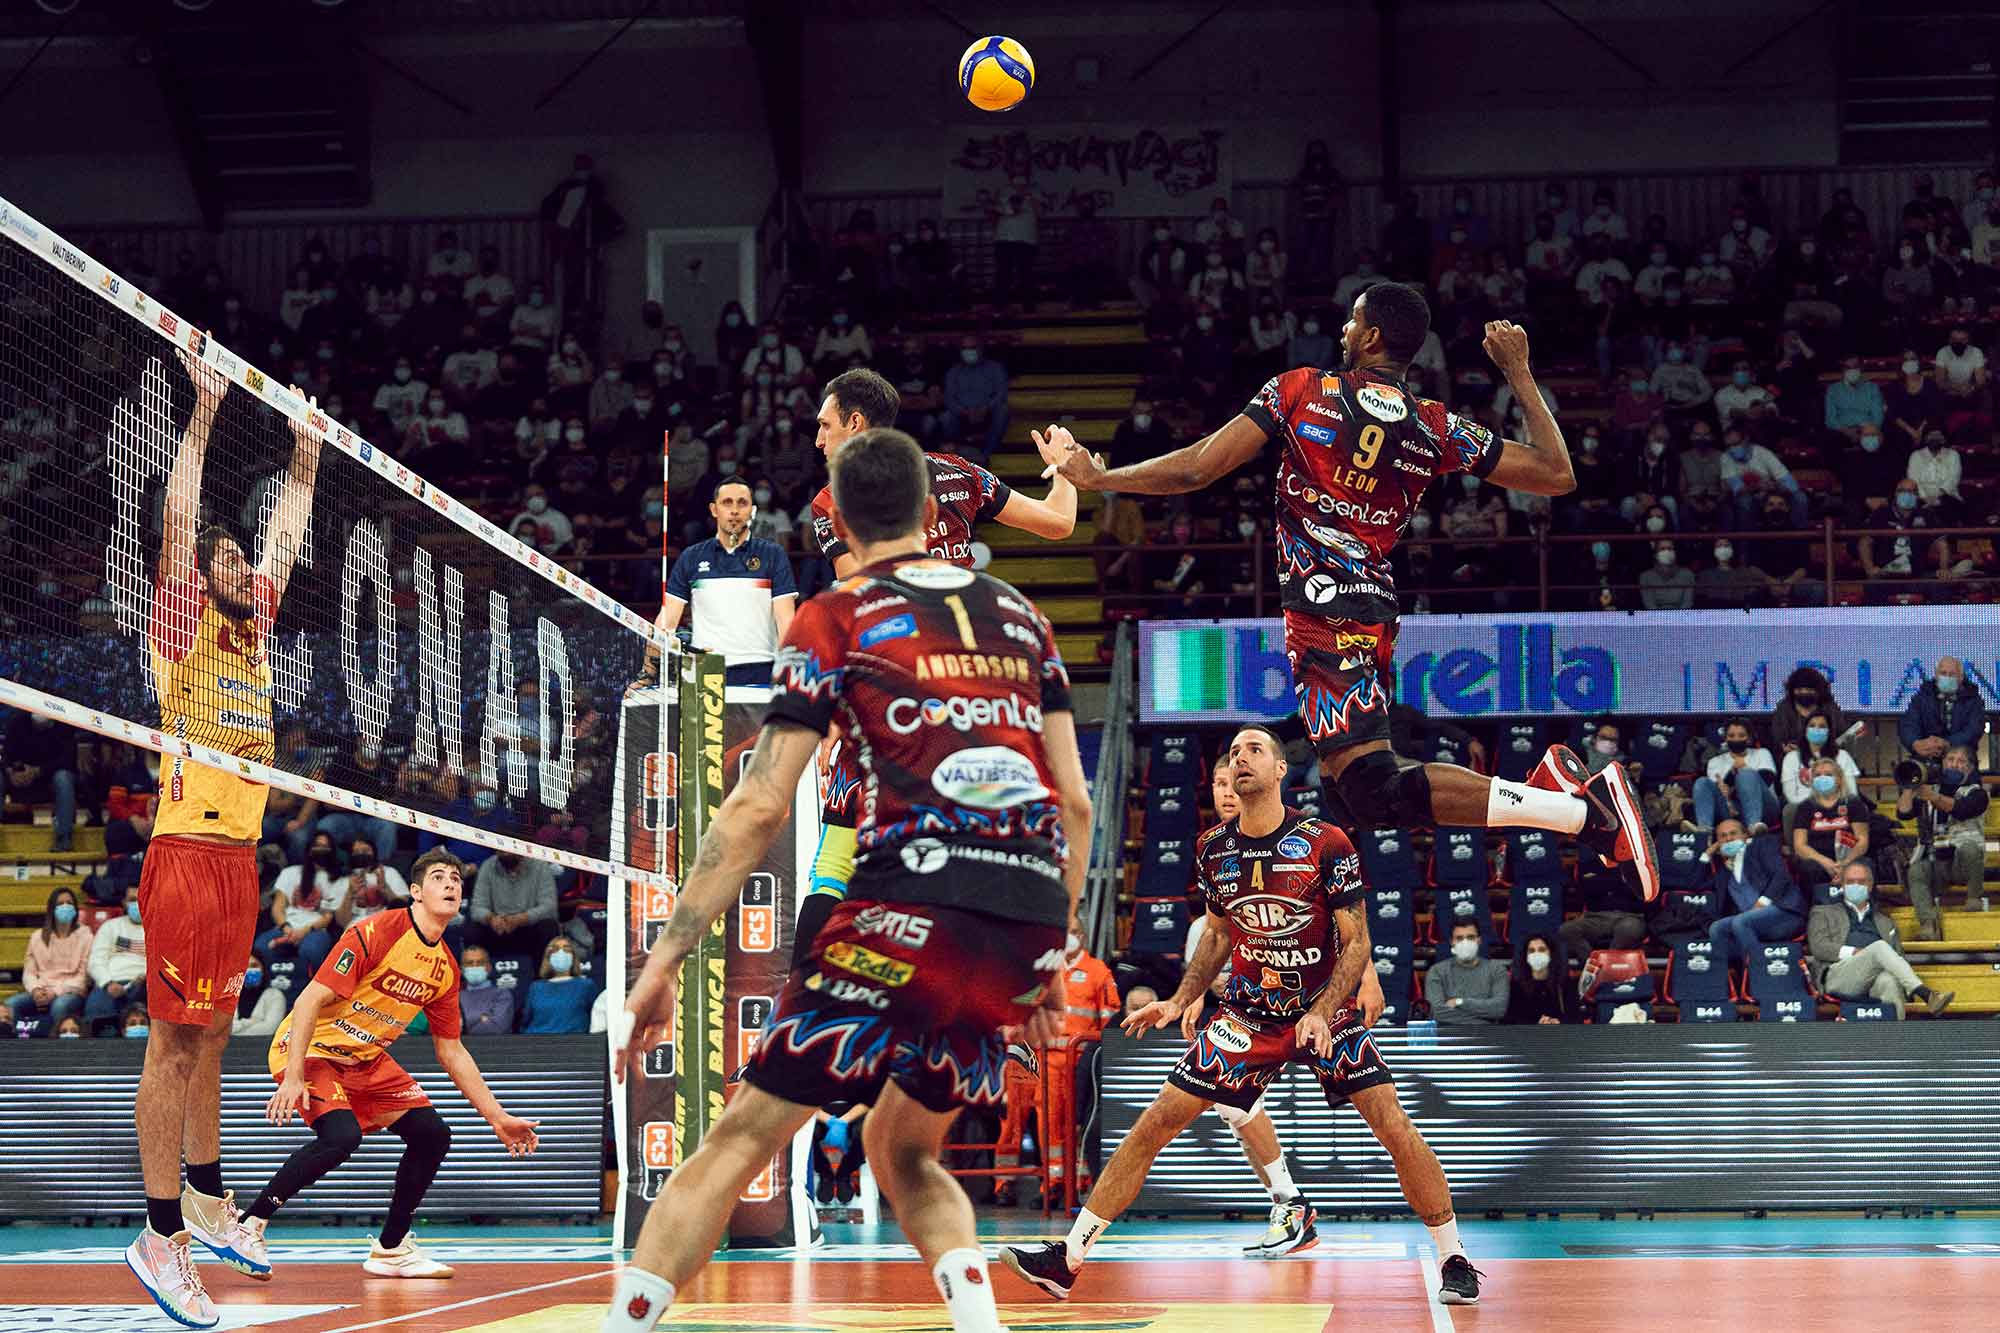 Sporting imagery captured at the live Perugia Volleyball game ahead of ASICS Globals new campaign